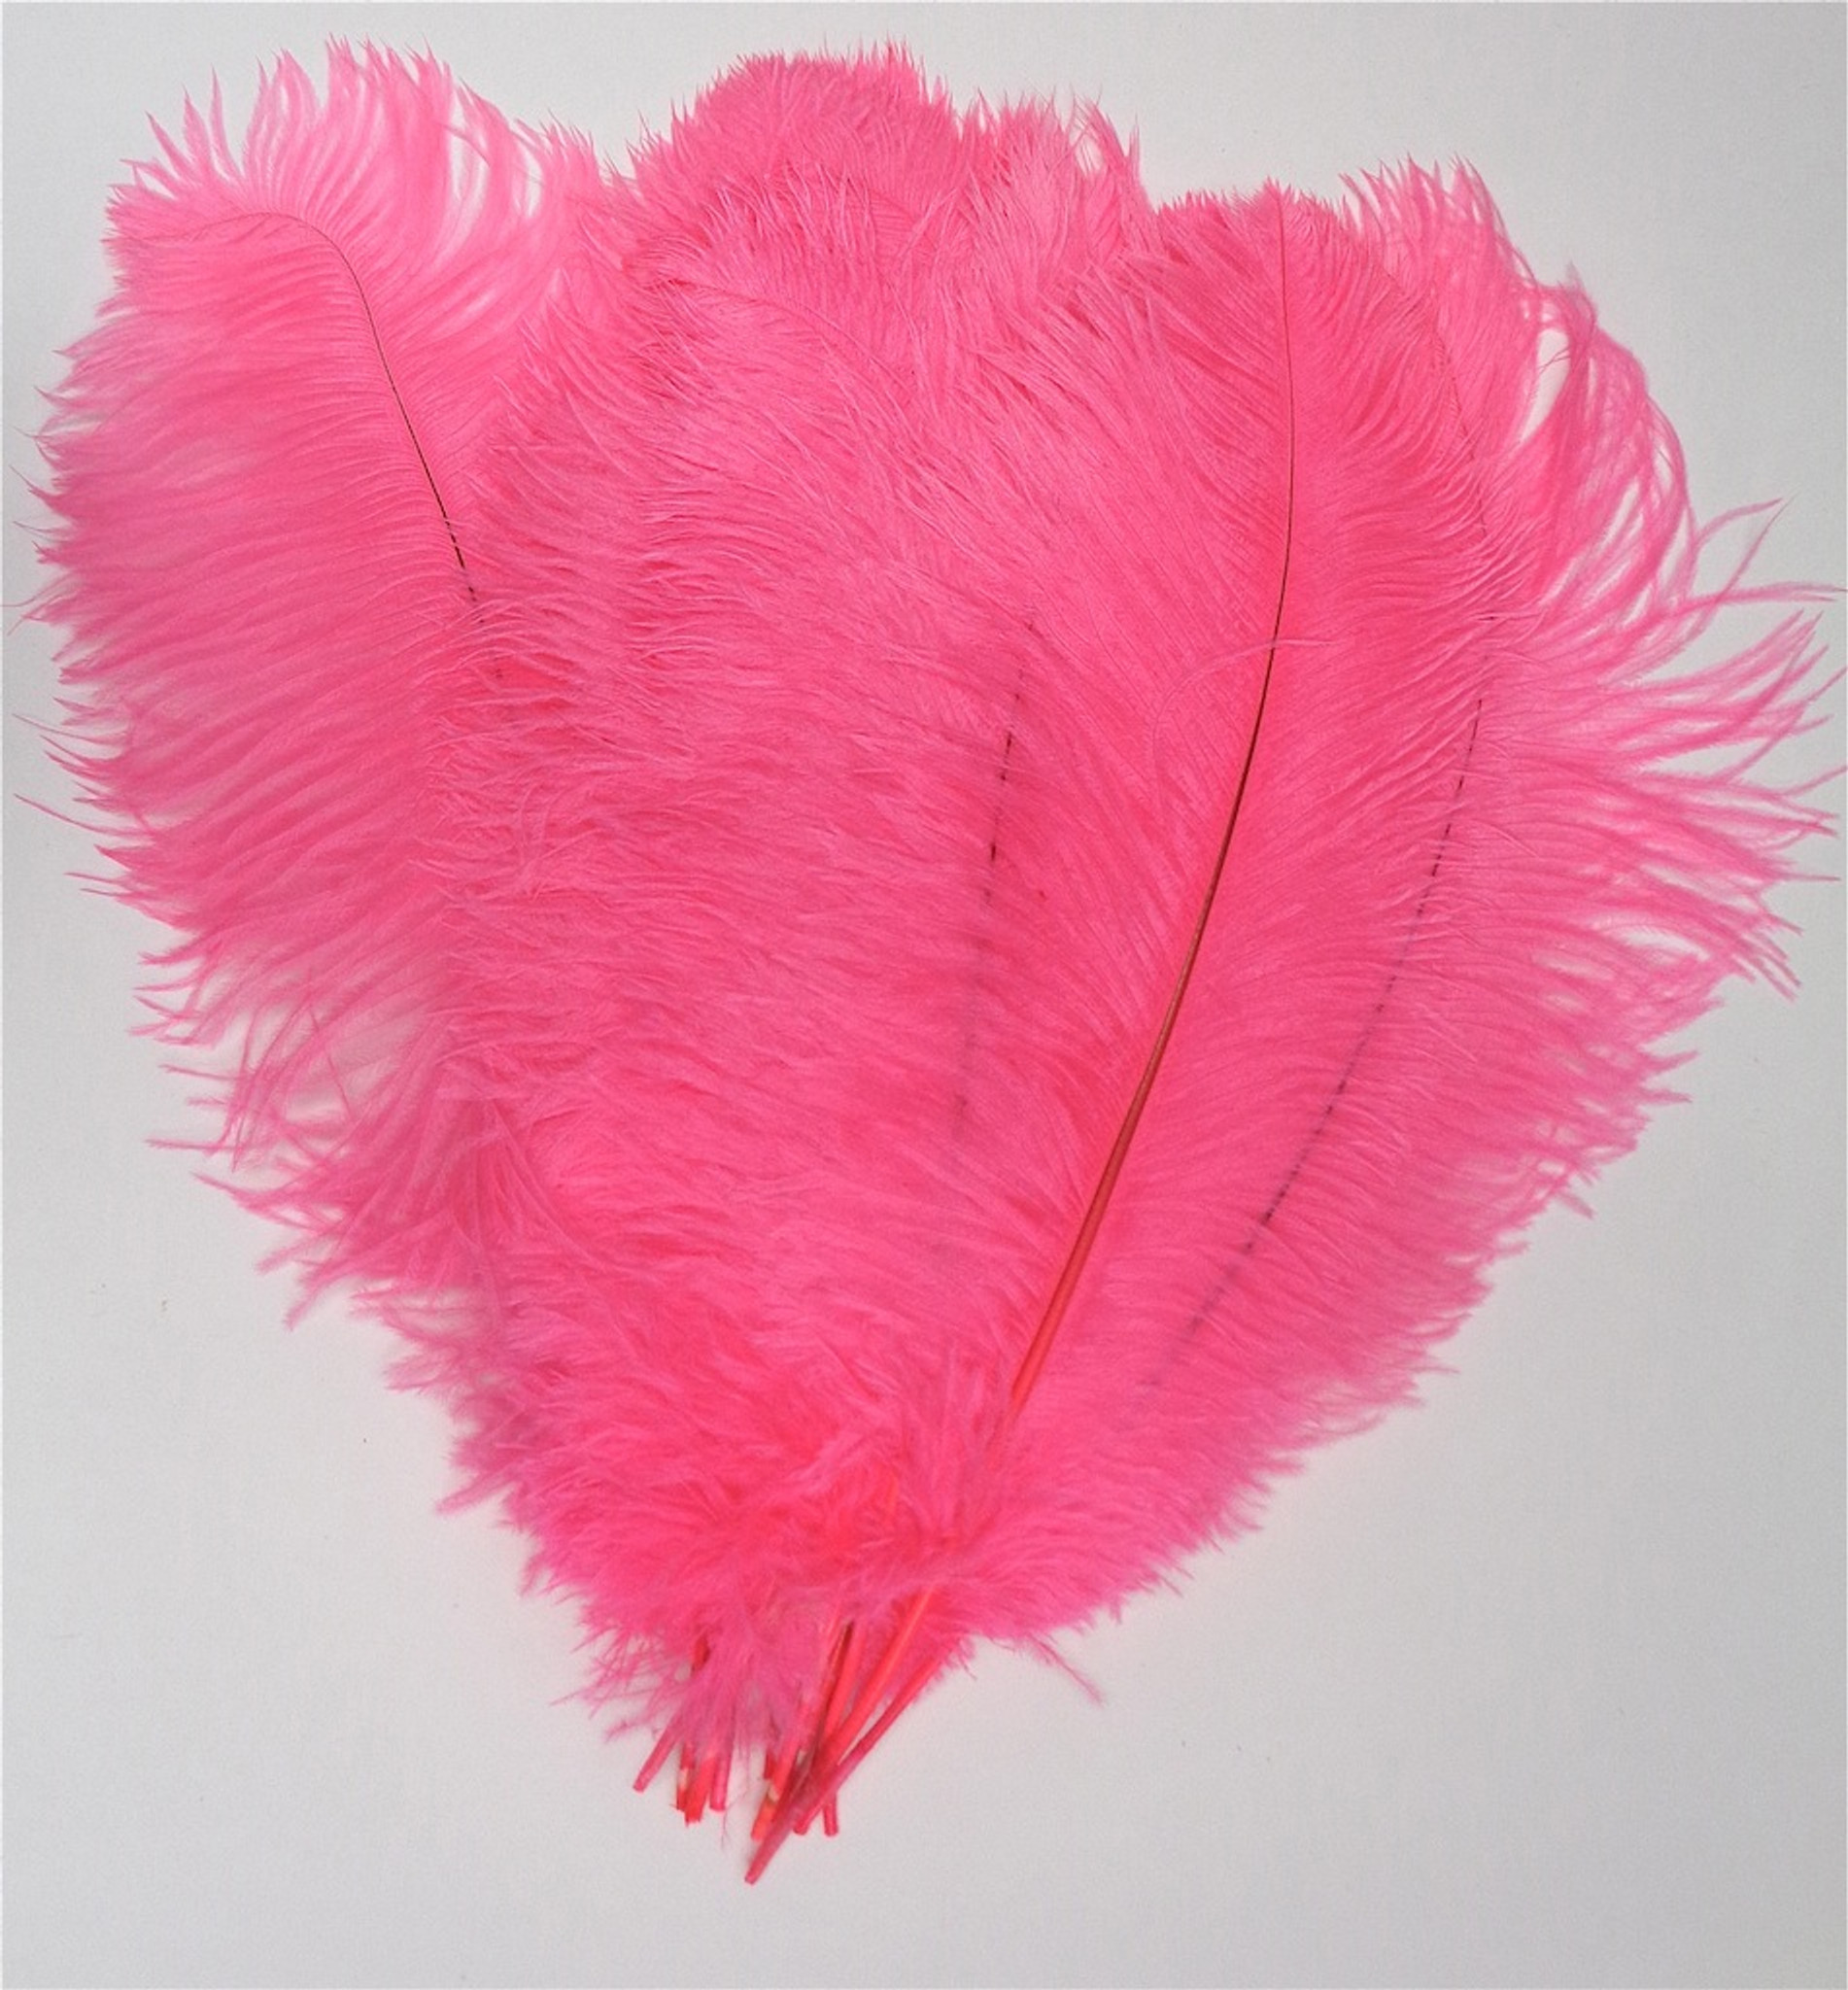 THARAHT 12pcs Hot Pink Ostrich Feathers Natural Bulk 16-18Inch 40cm-45cm  for Wedding Party centerpieces Easter gatsby and Home D